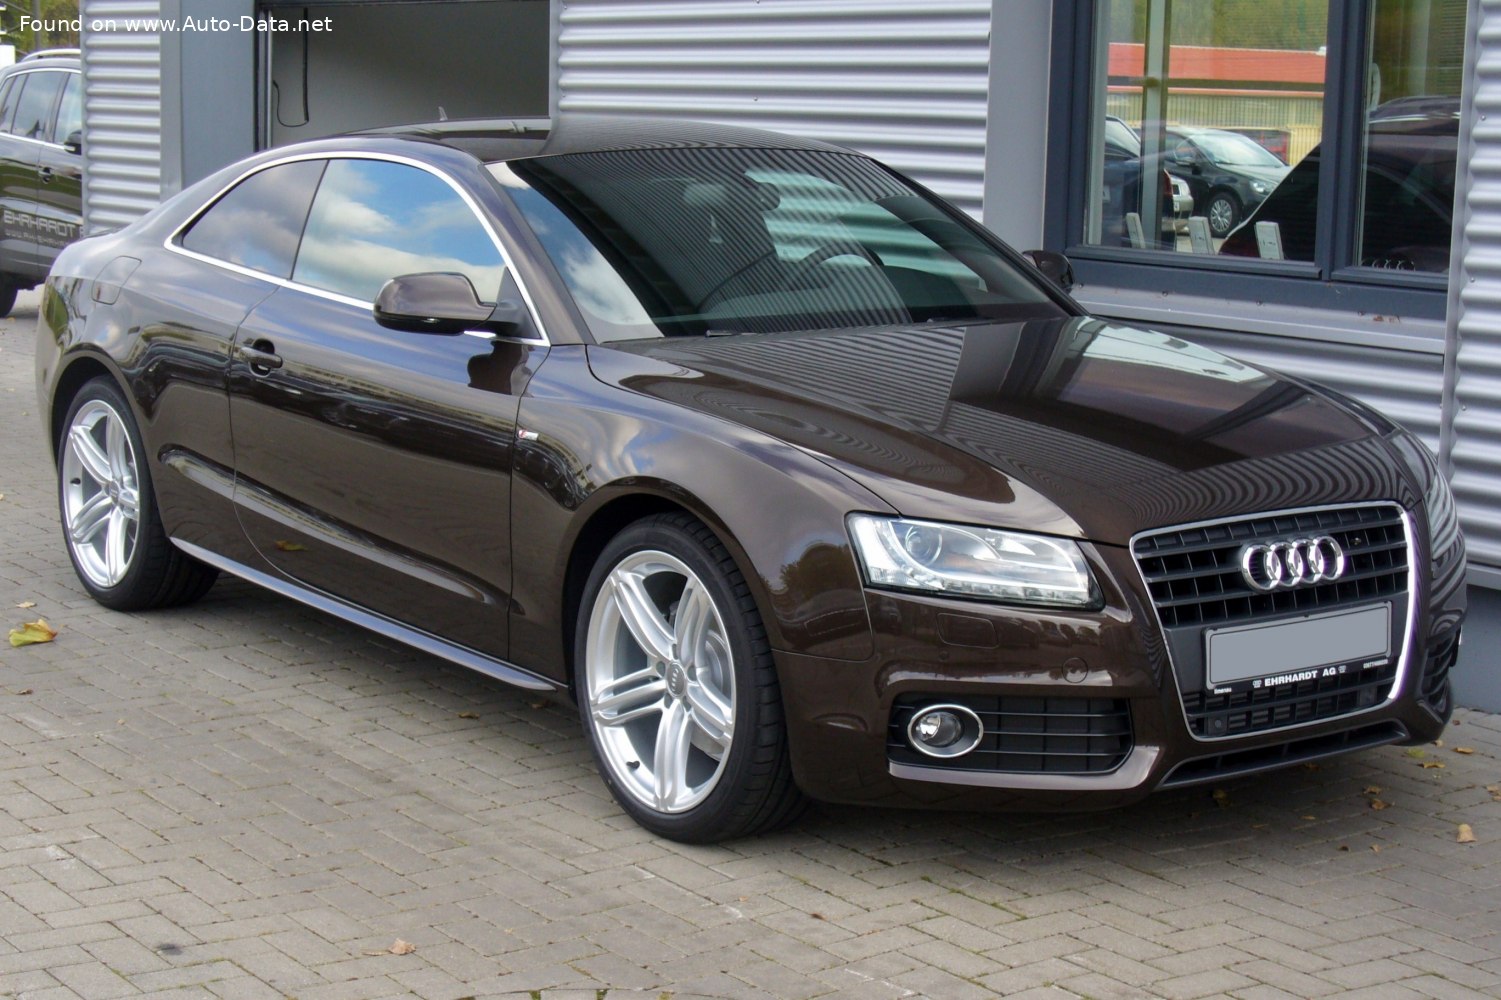 staking Lot Beg 2008 Audi A5 Coupe (8T3) 2.0 TFSI (211 Hp) quattro | Technical specs, data,  fuel consumption, Dimensions